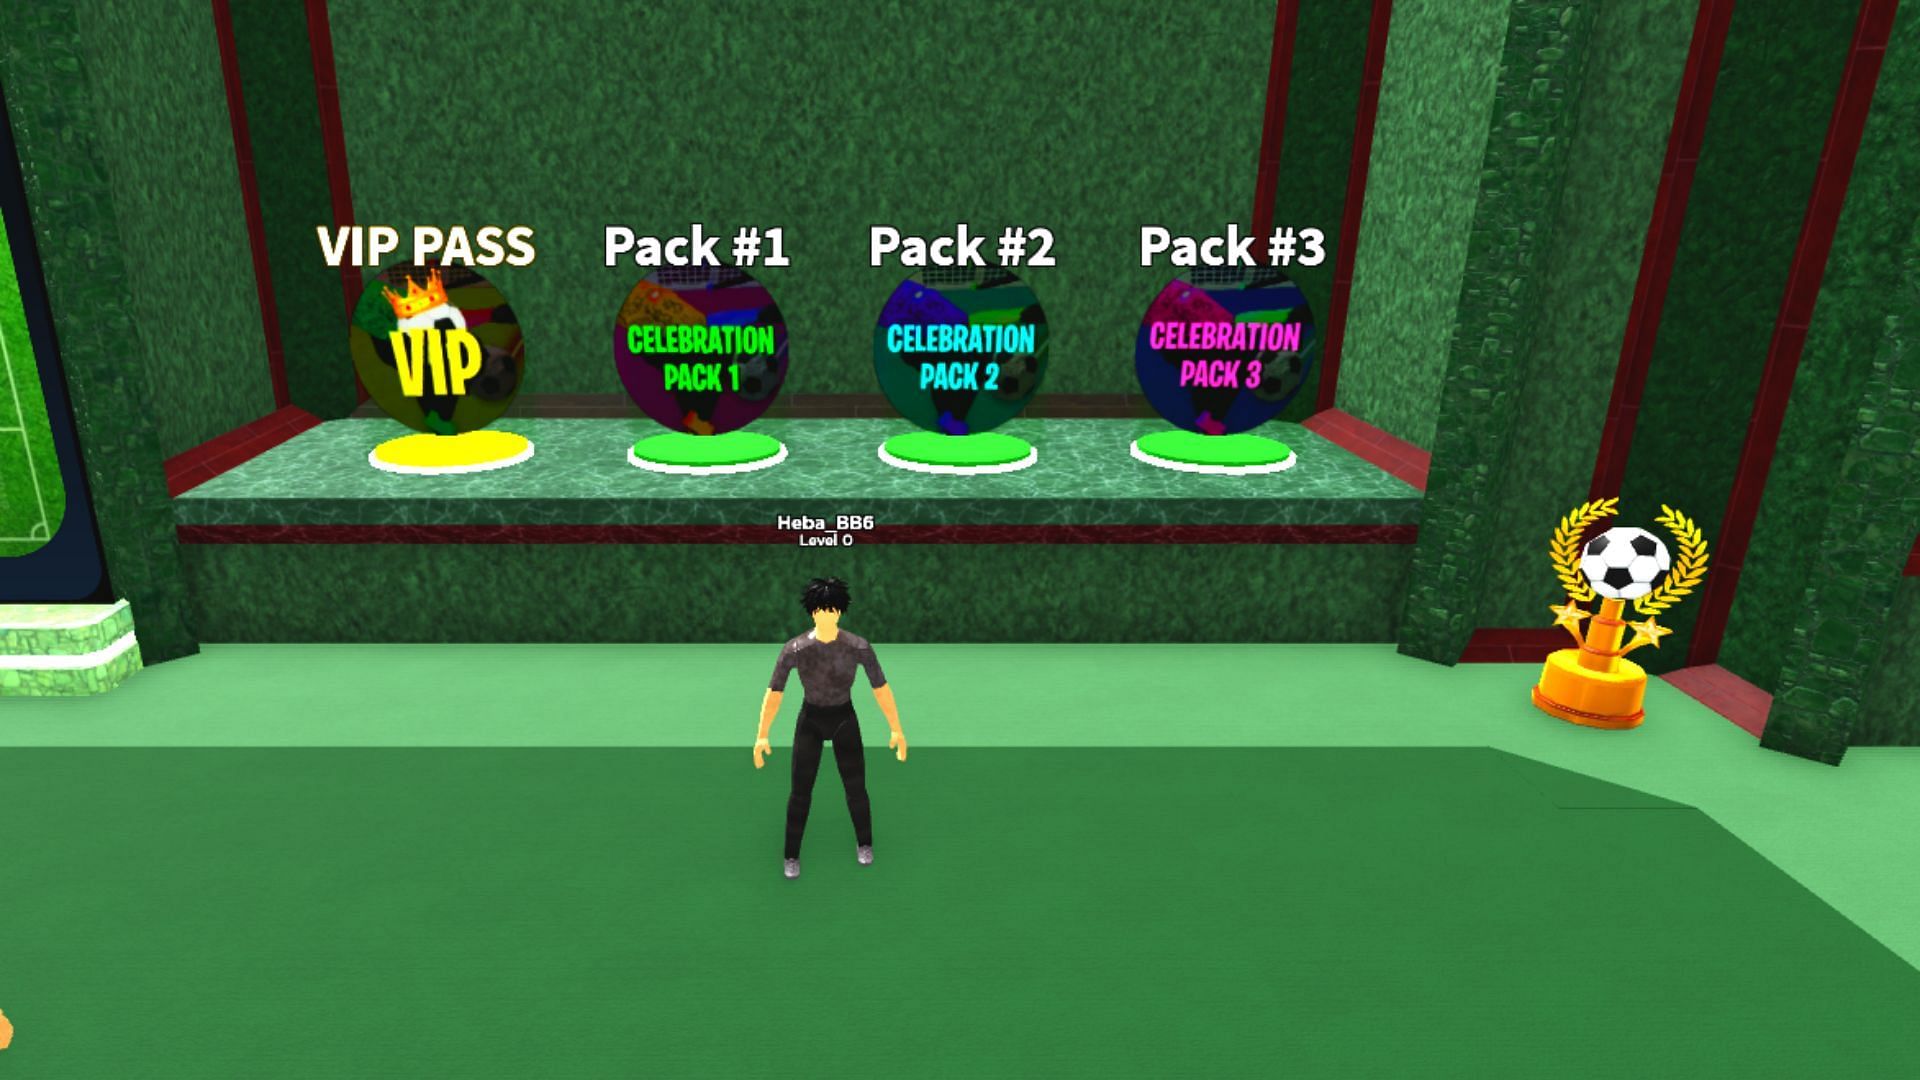 VIP Pass &amp; Multiple Celebration Pack in Realistic Street Soccer (Image via Roblox)